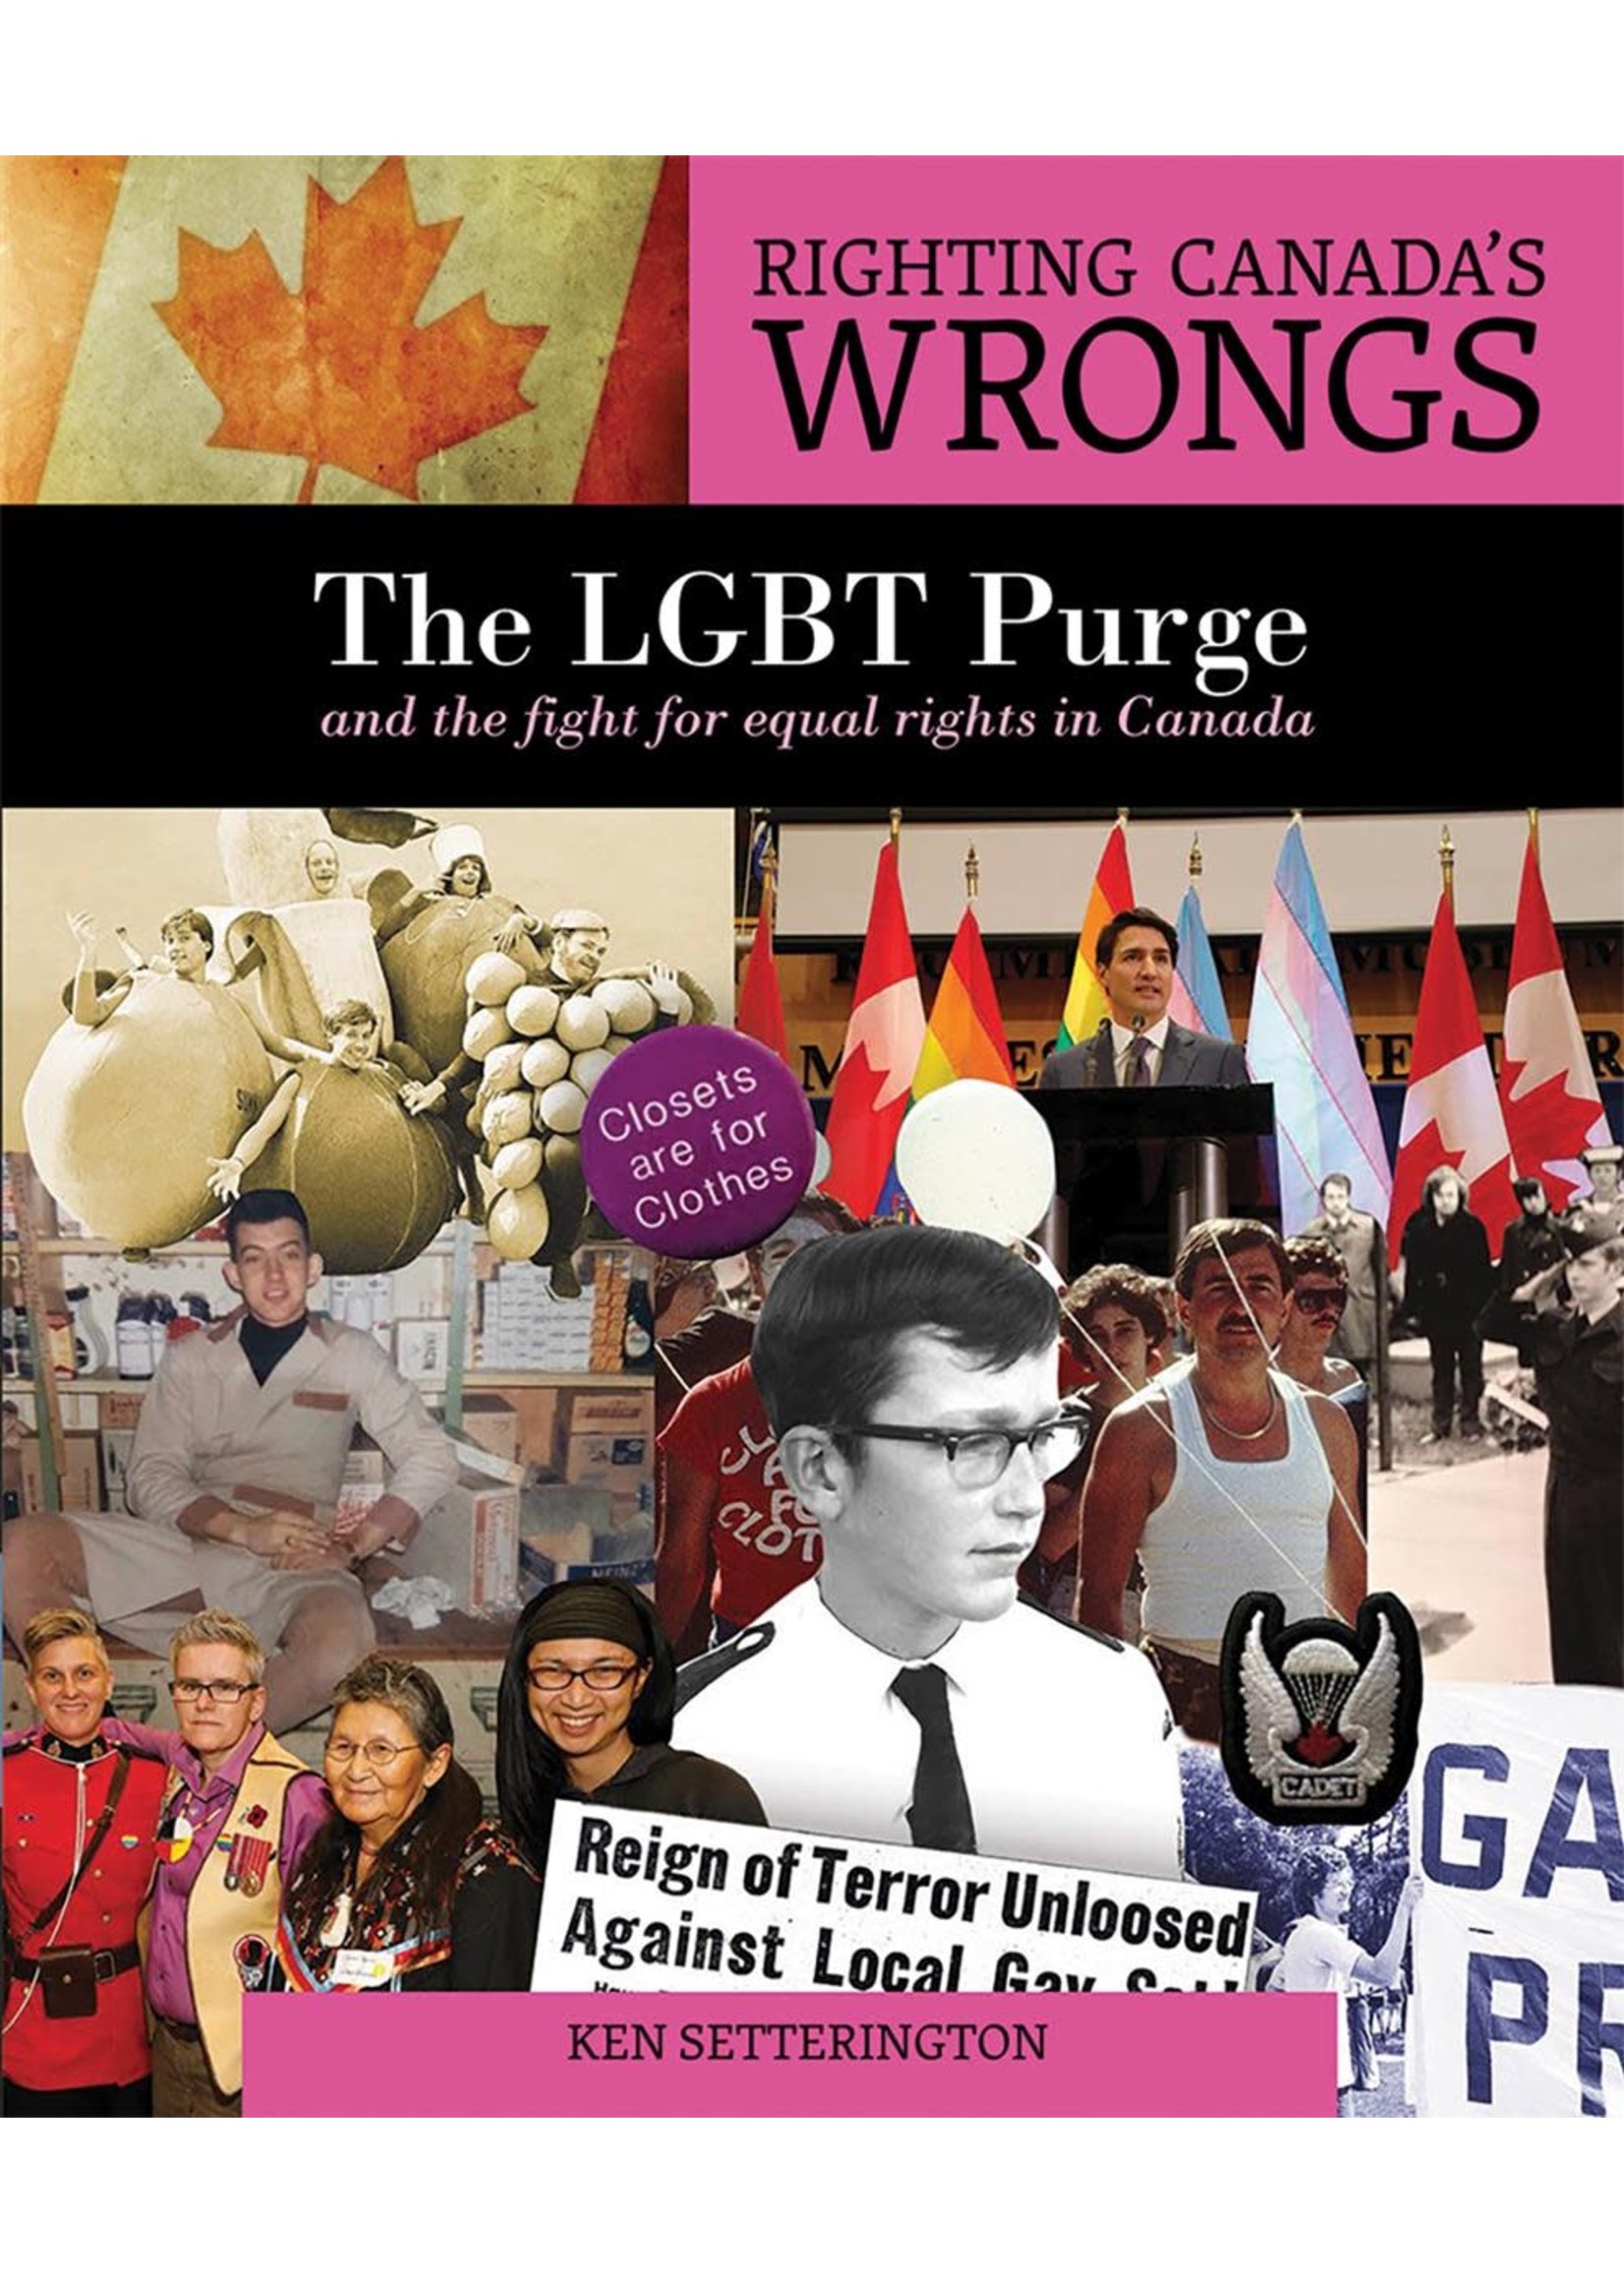 Righting Canada's Wrongs: The LGBT Purge and the fight for equal rights in Canada by Ken Setterington